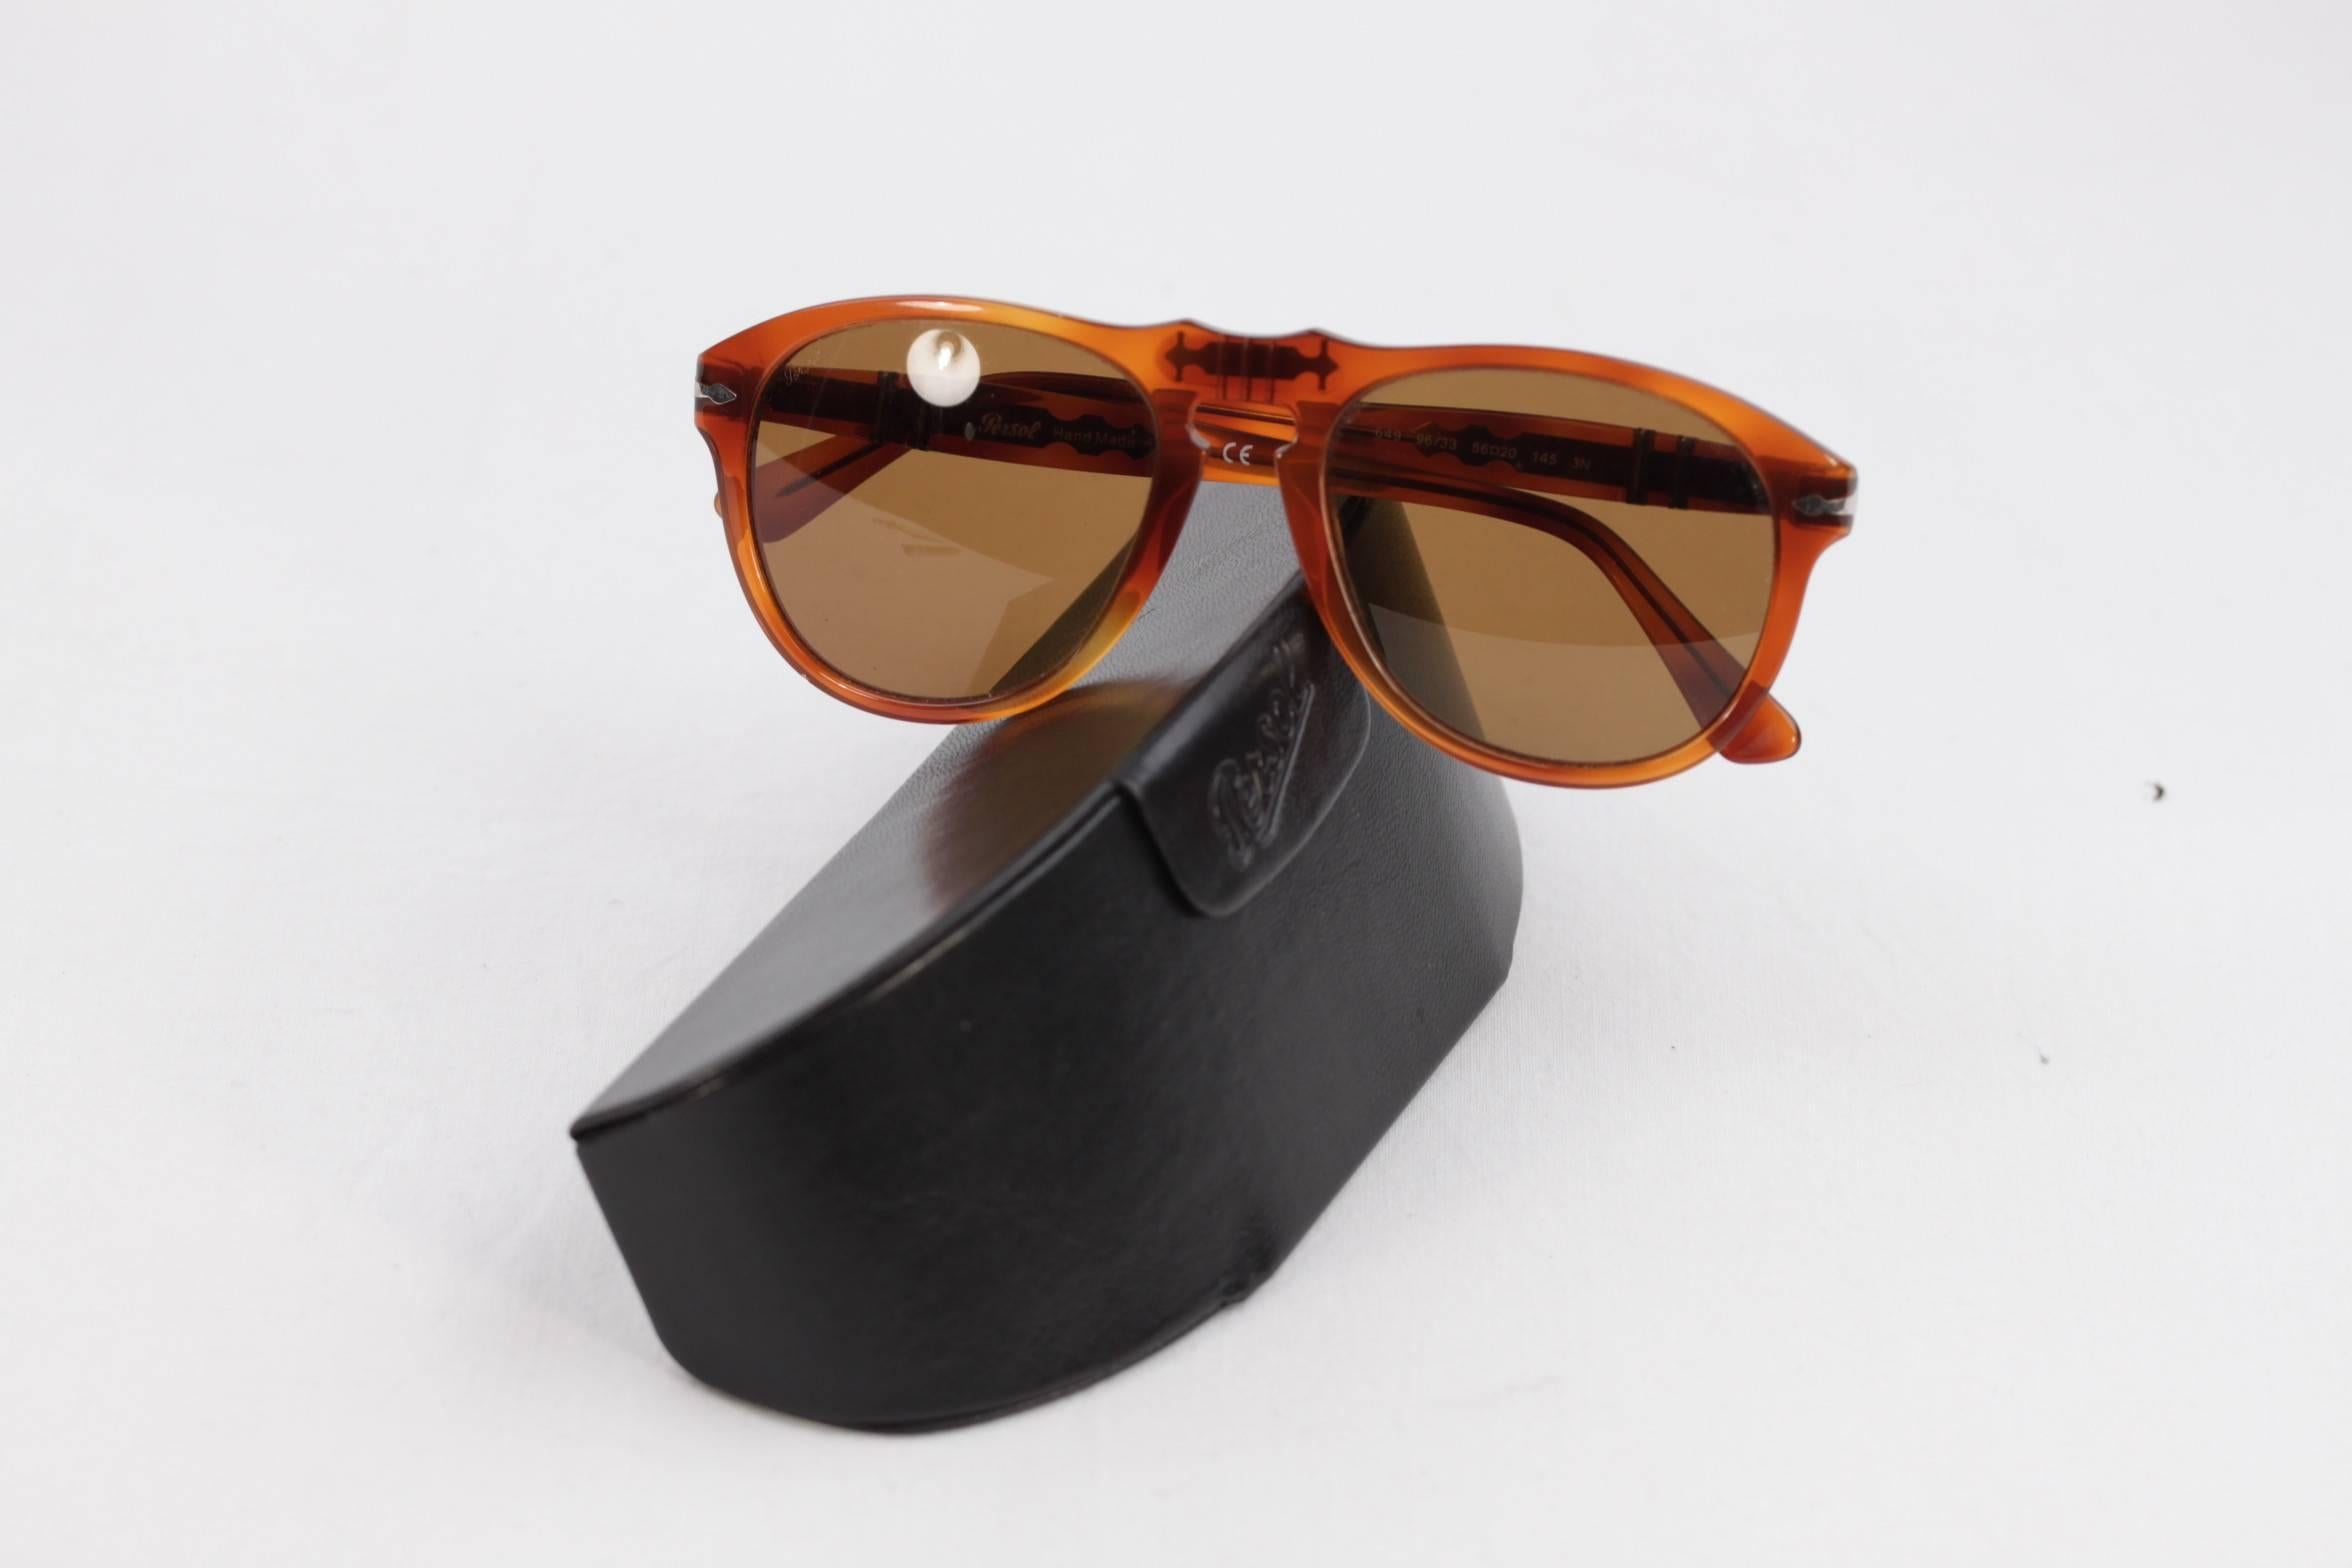 Brand: PERSOL

Made in: Italy

Style Name & Number: 649 - 96/33 - 56/20 - 145 - 3N - Hand made in Italy

Condition:

MINT~ Appears new, with imperceptible signs of use. Lens/filters may have micro scatches, which are NOT VISIBLE and NOT